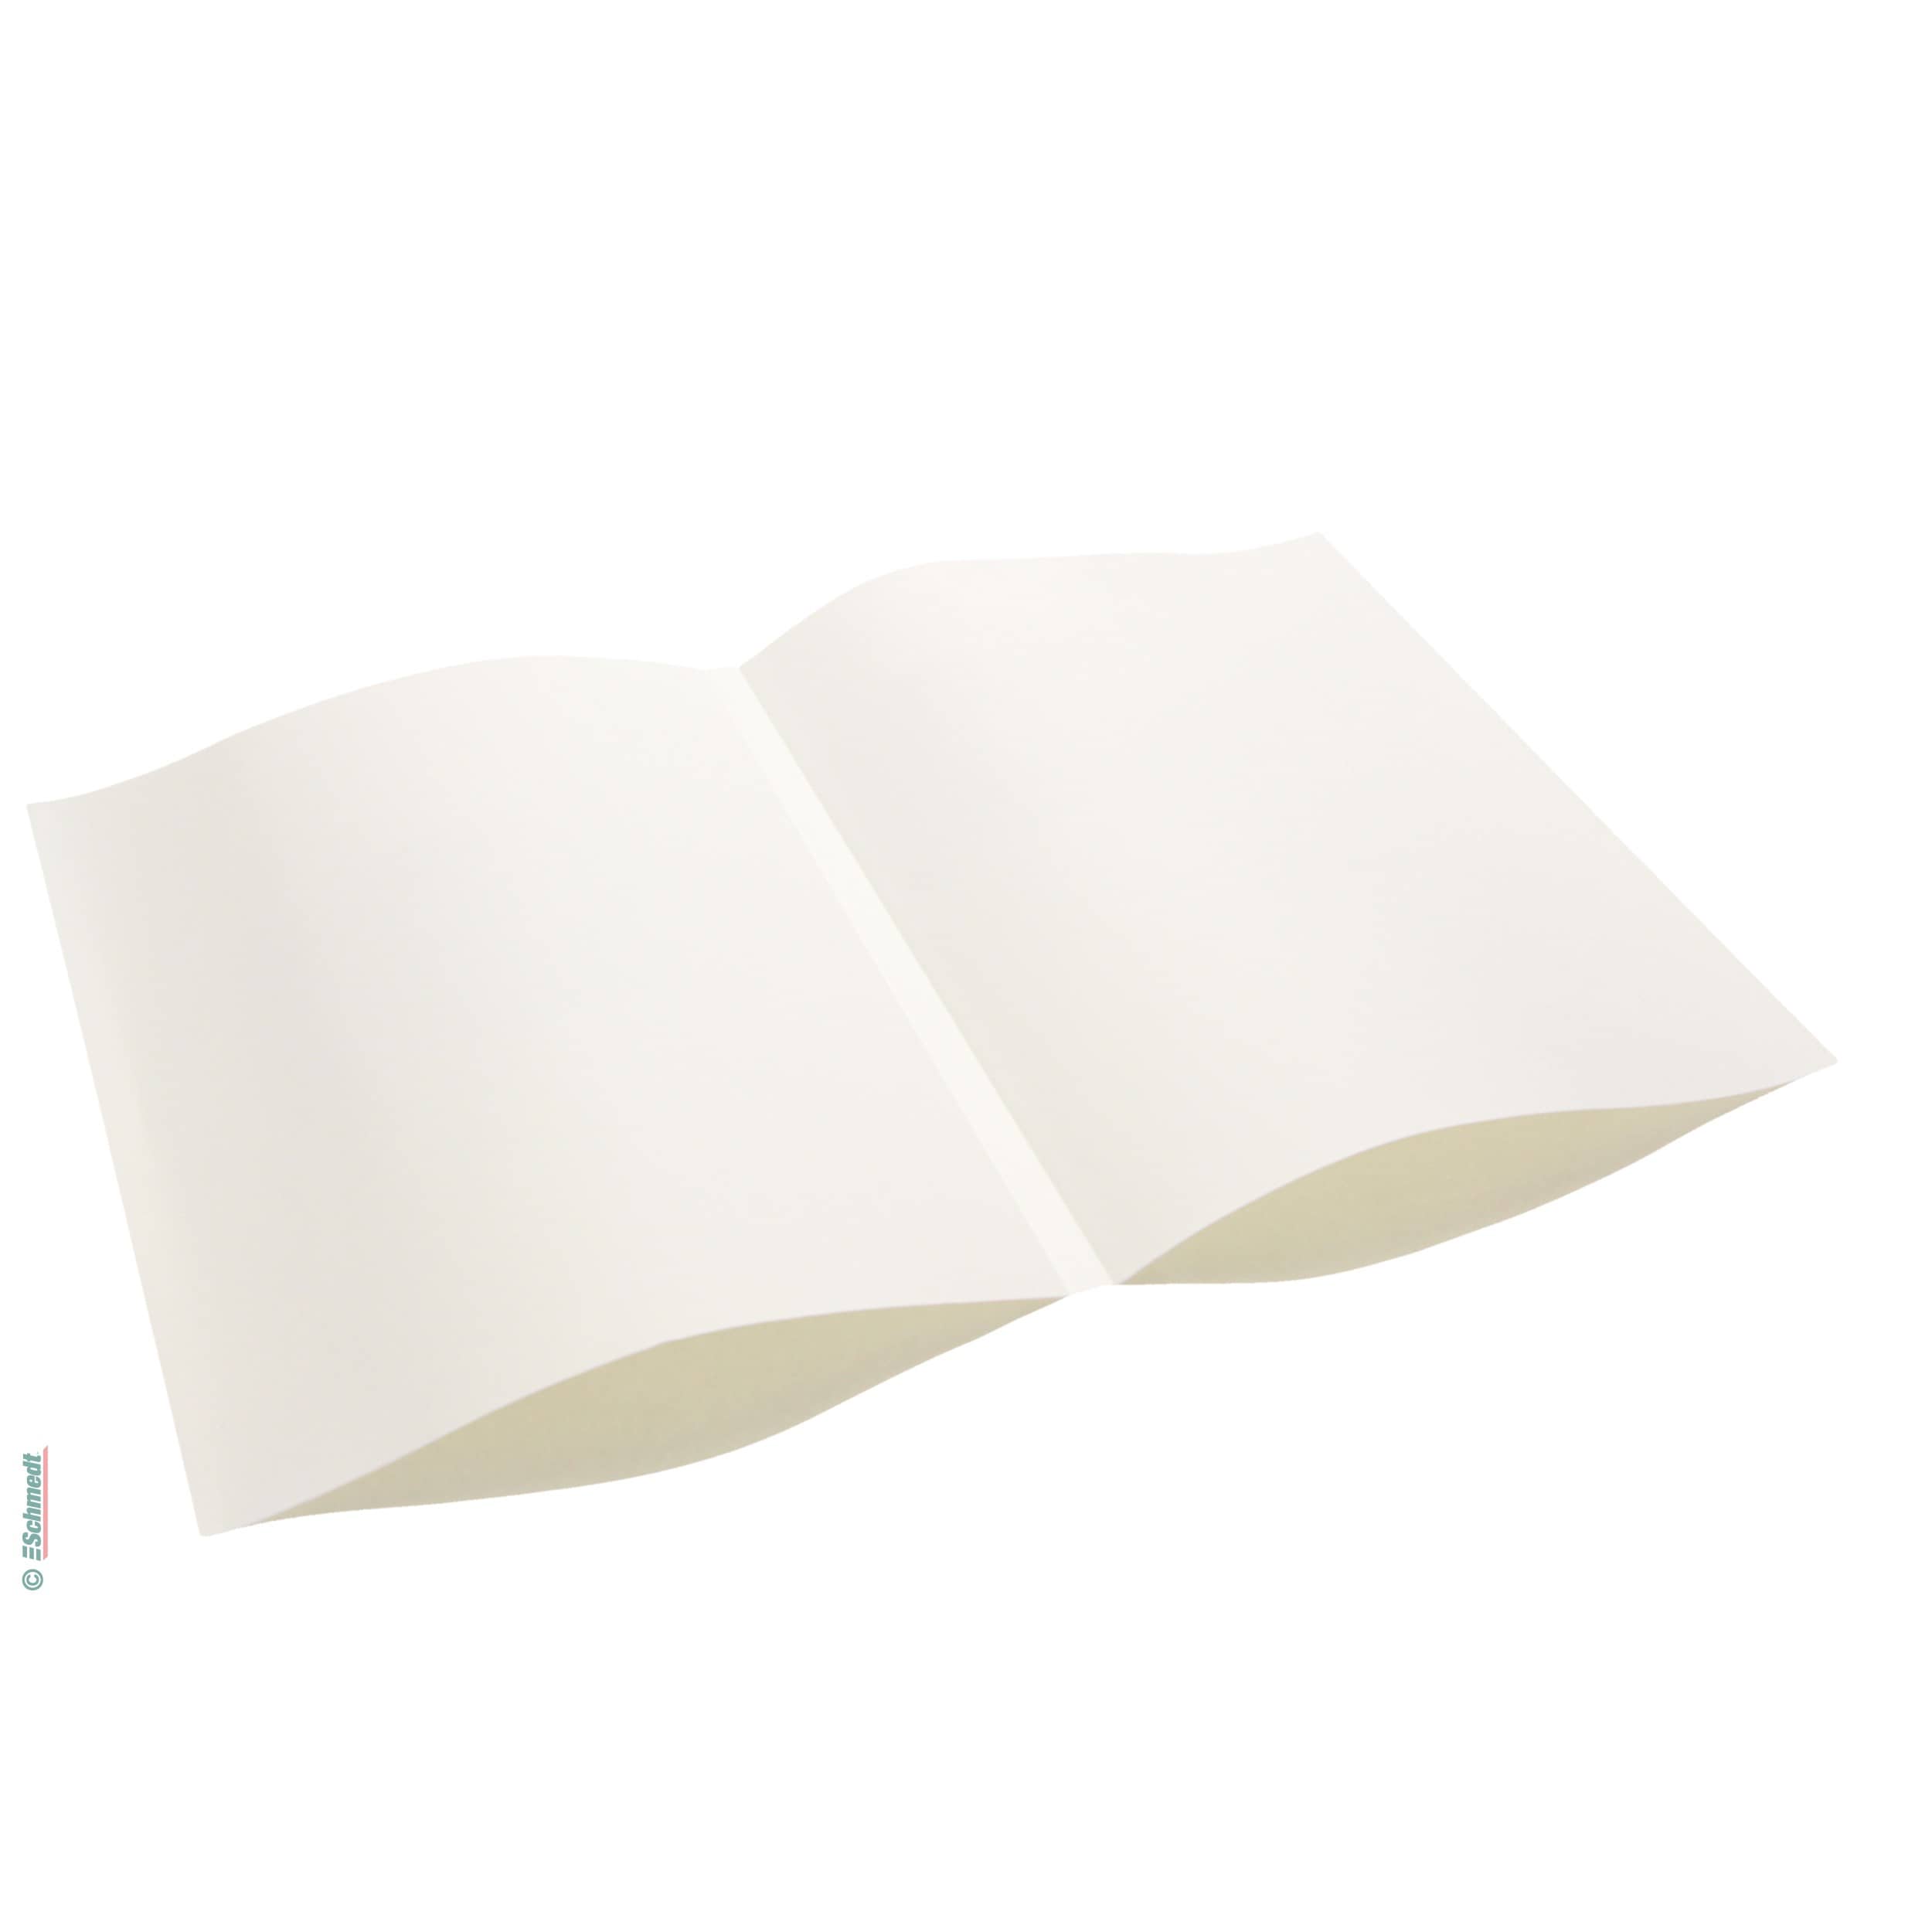 PräziCover Combined Endsheets - bright white, laid - Book block thickness (in mm) 36,6 - 40,5 - to produce book blocks with real endsheets f...